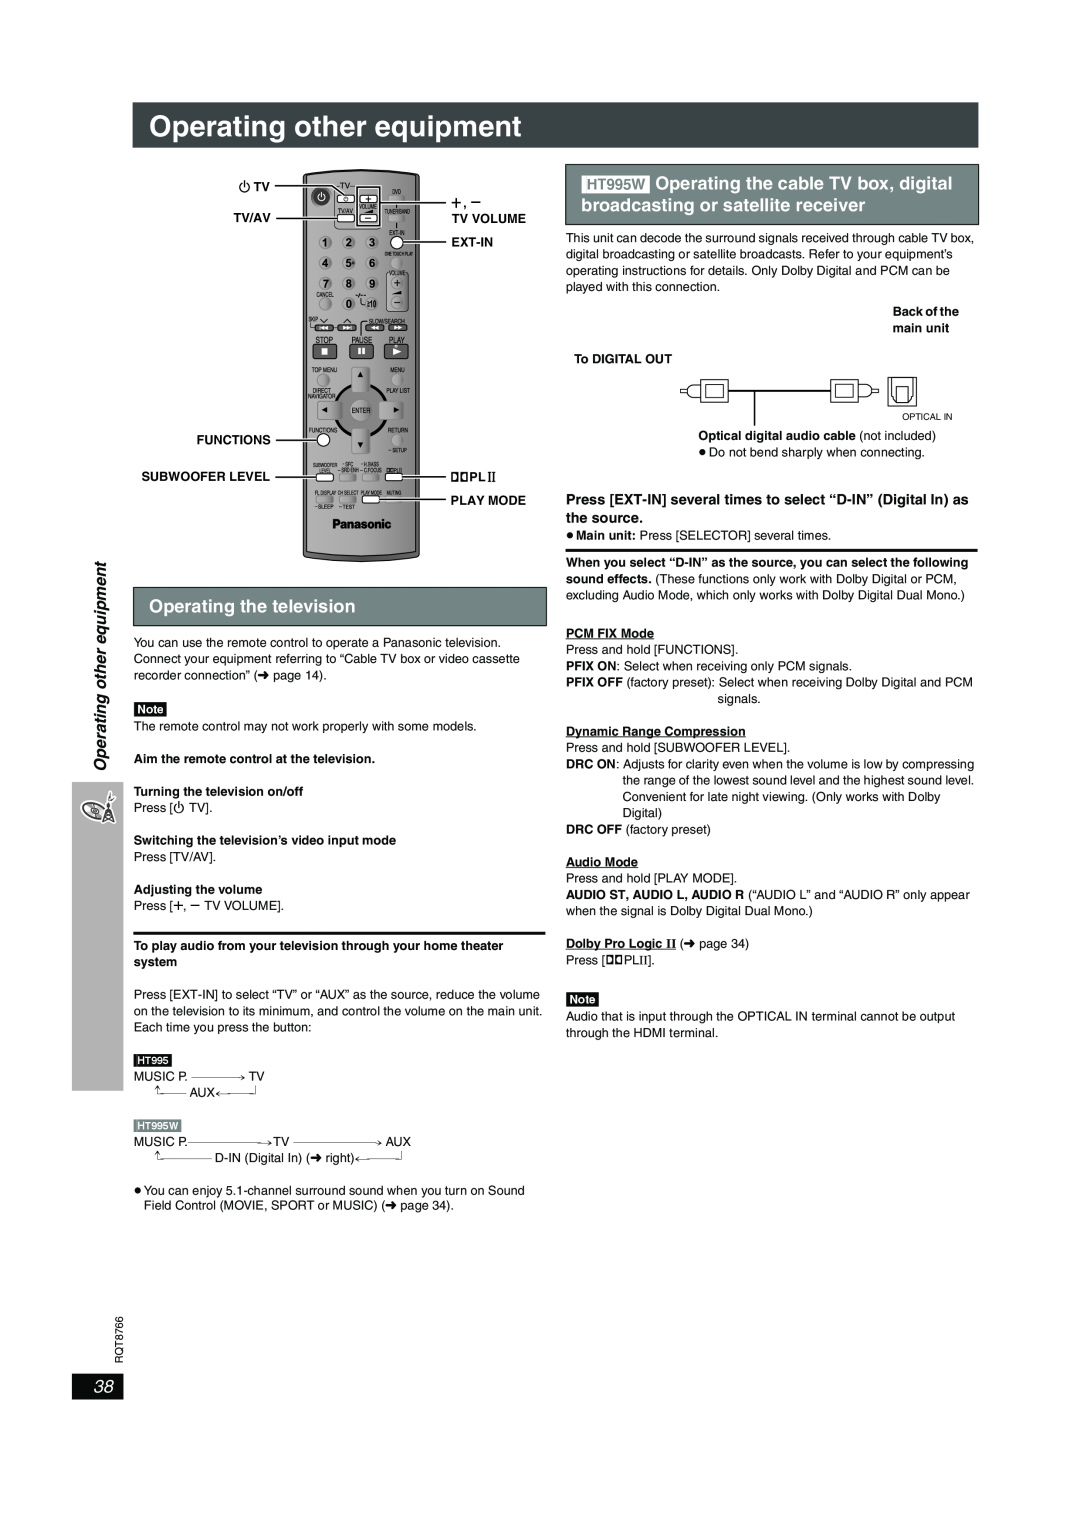 Panasonic SC-HT995W operating instructions Operating other equipment, Operating the television 